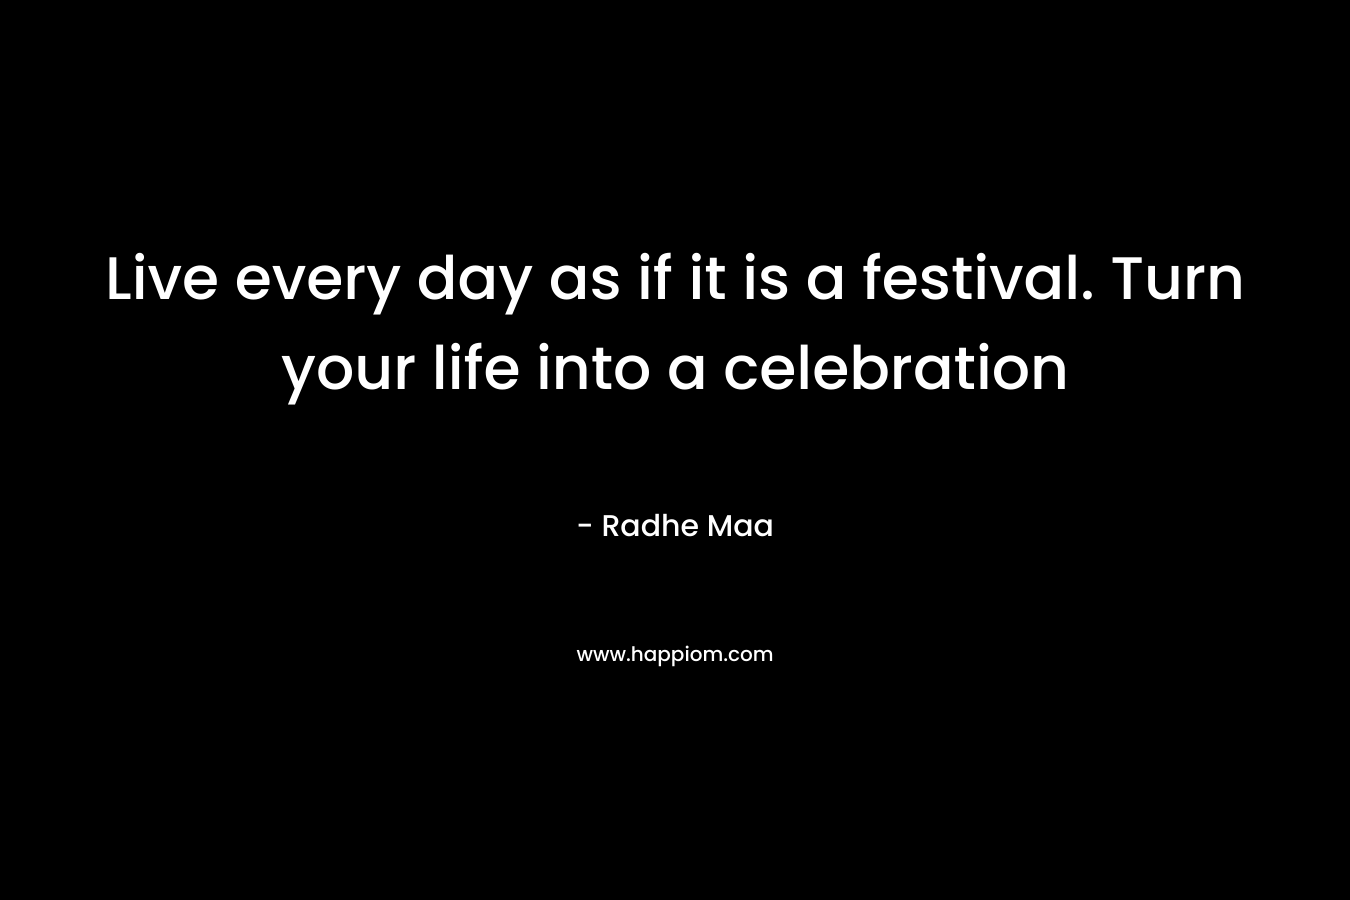 Live every day as if it is a festival. Turn your life into a celebration